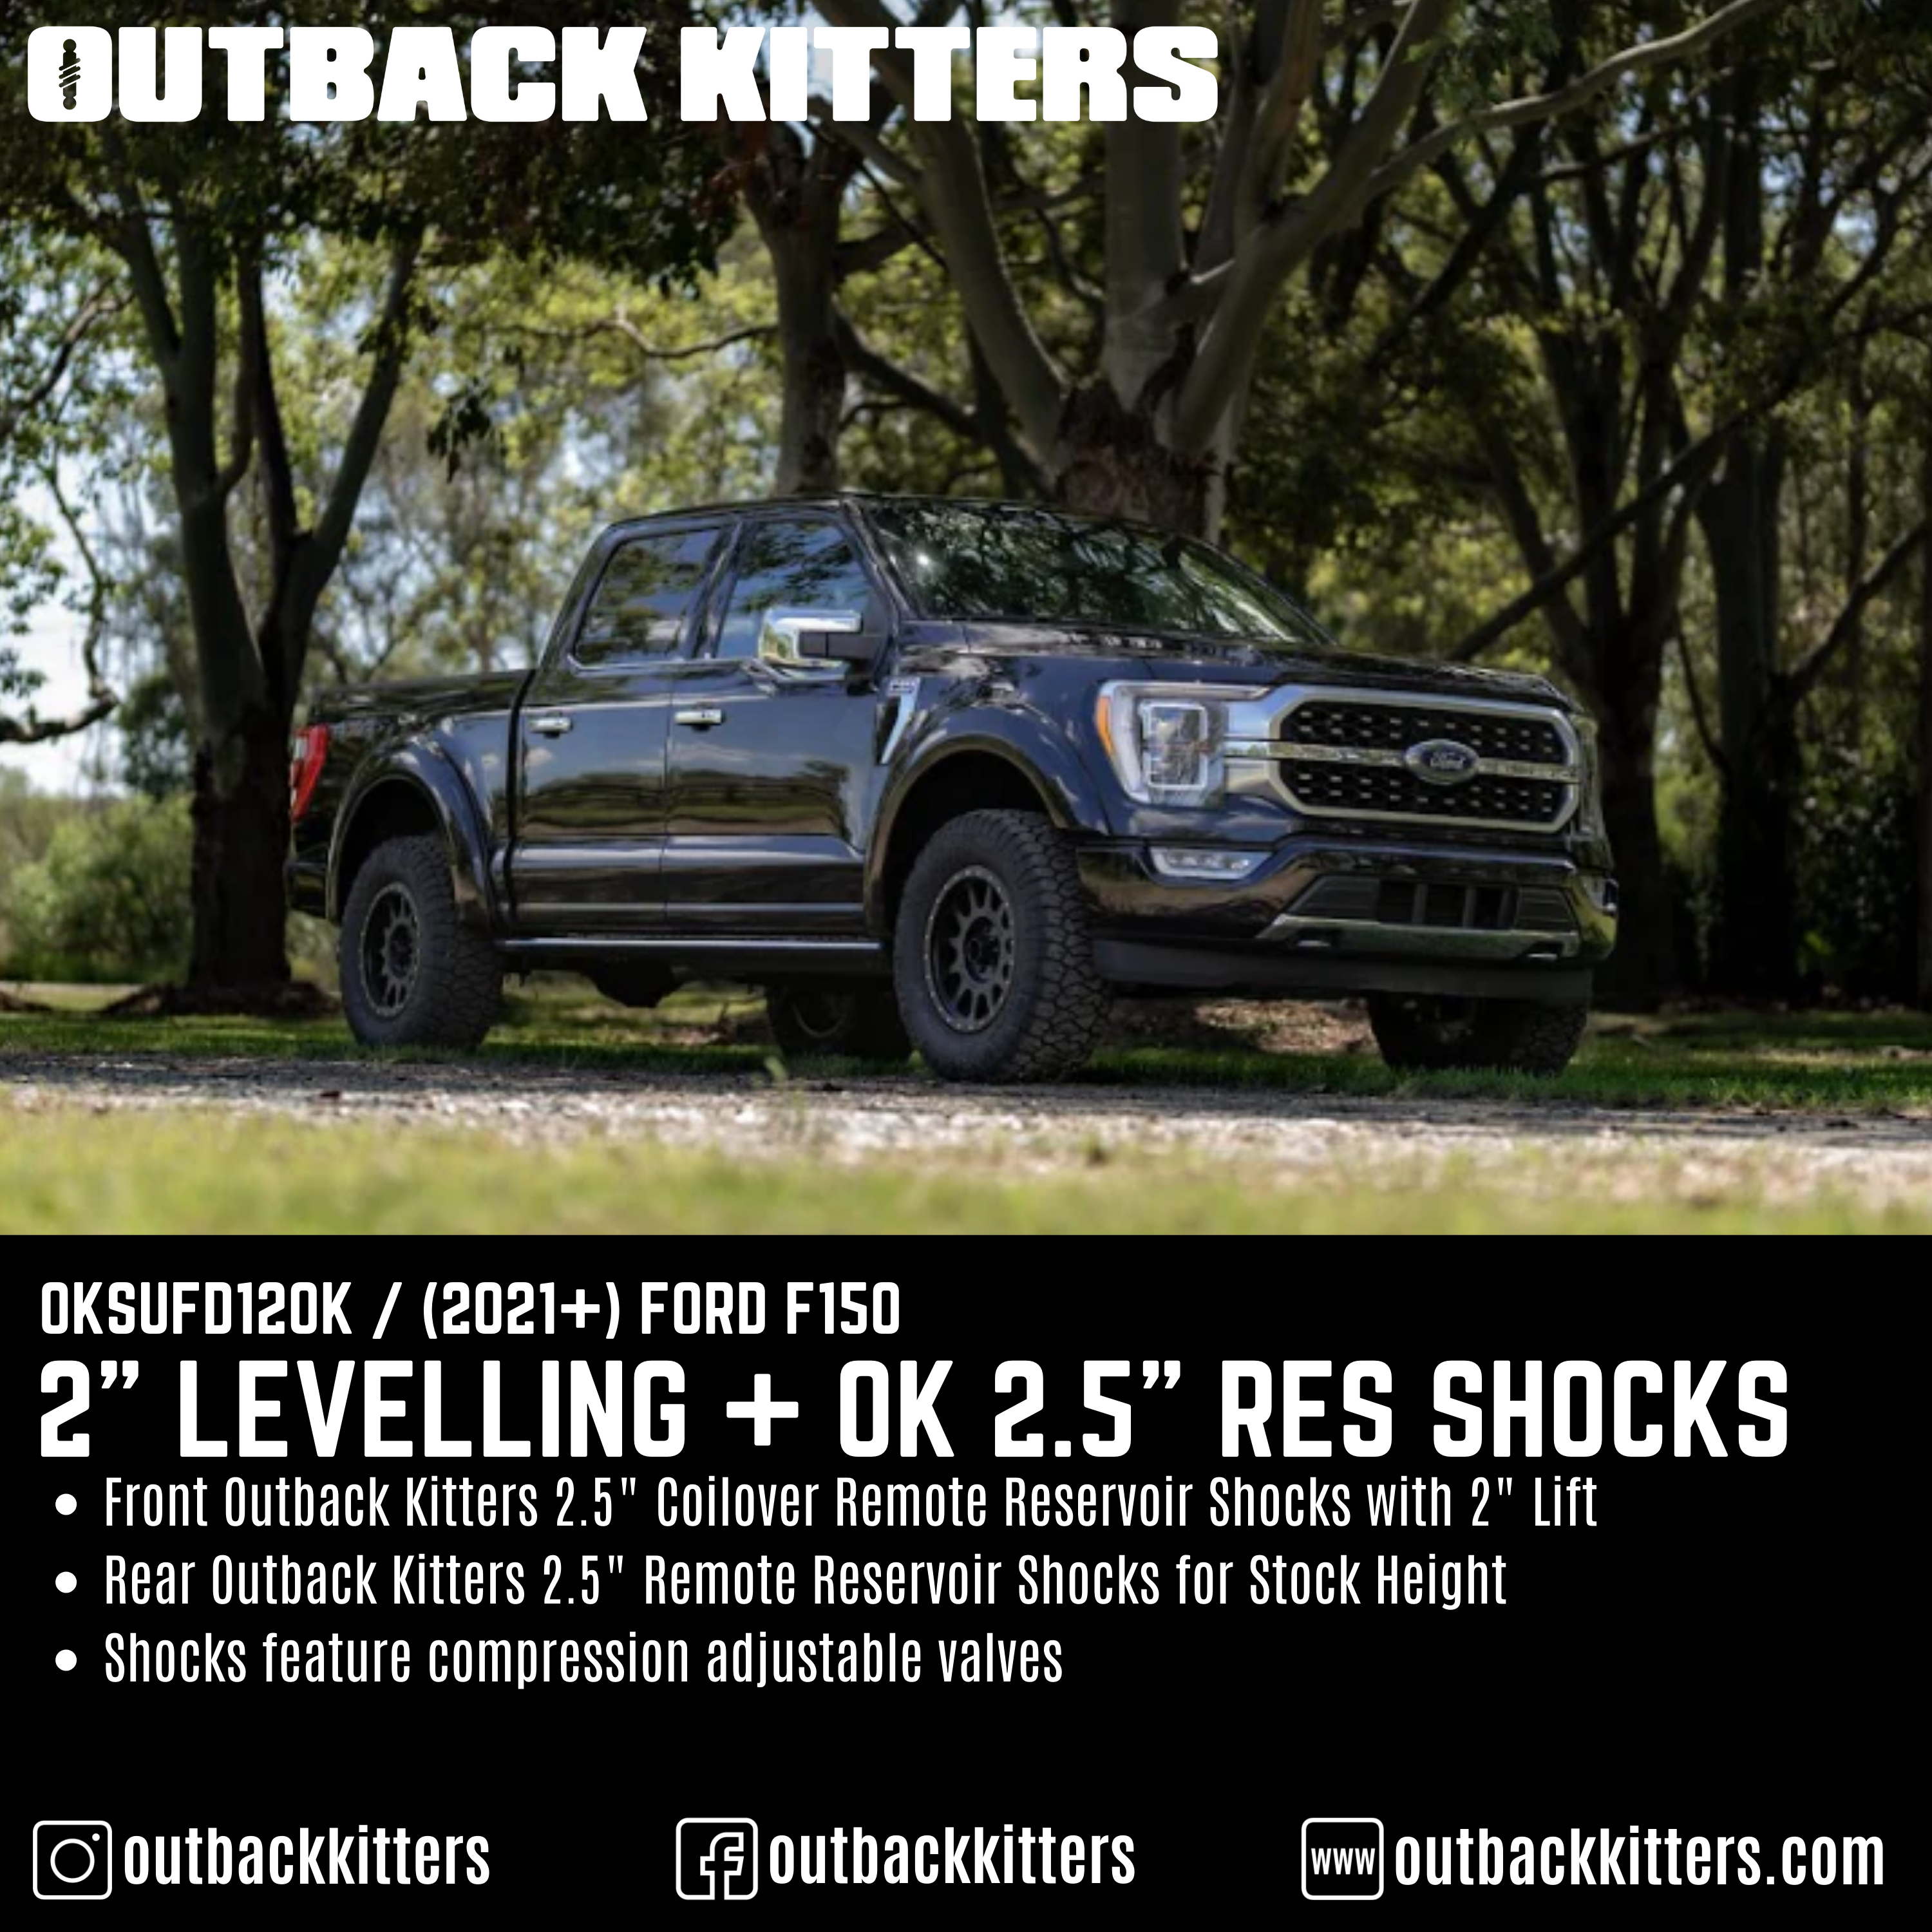 Outback Kitters 2" Lift Kit for 2021+ Ford F150 - Outback Kitters